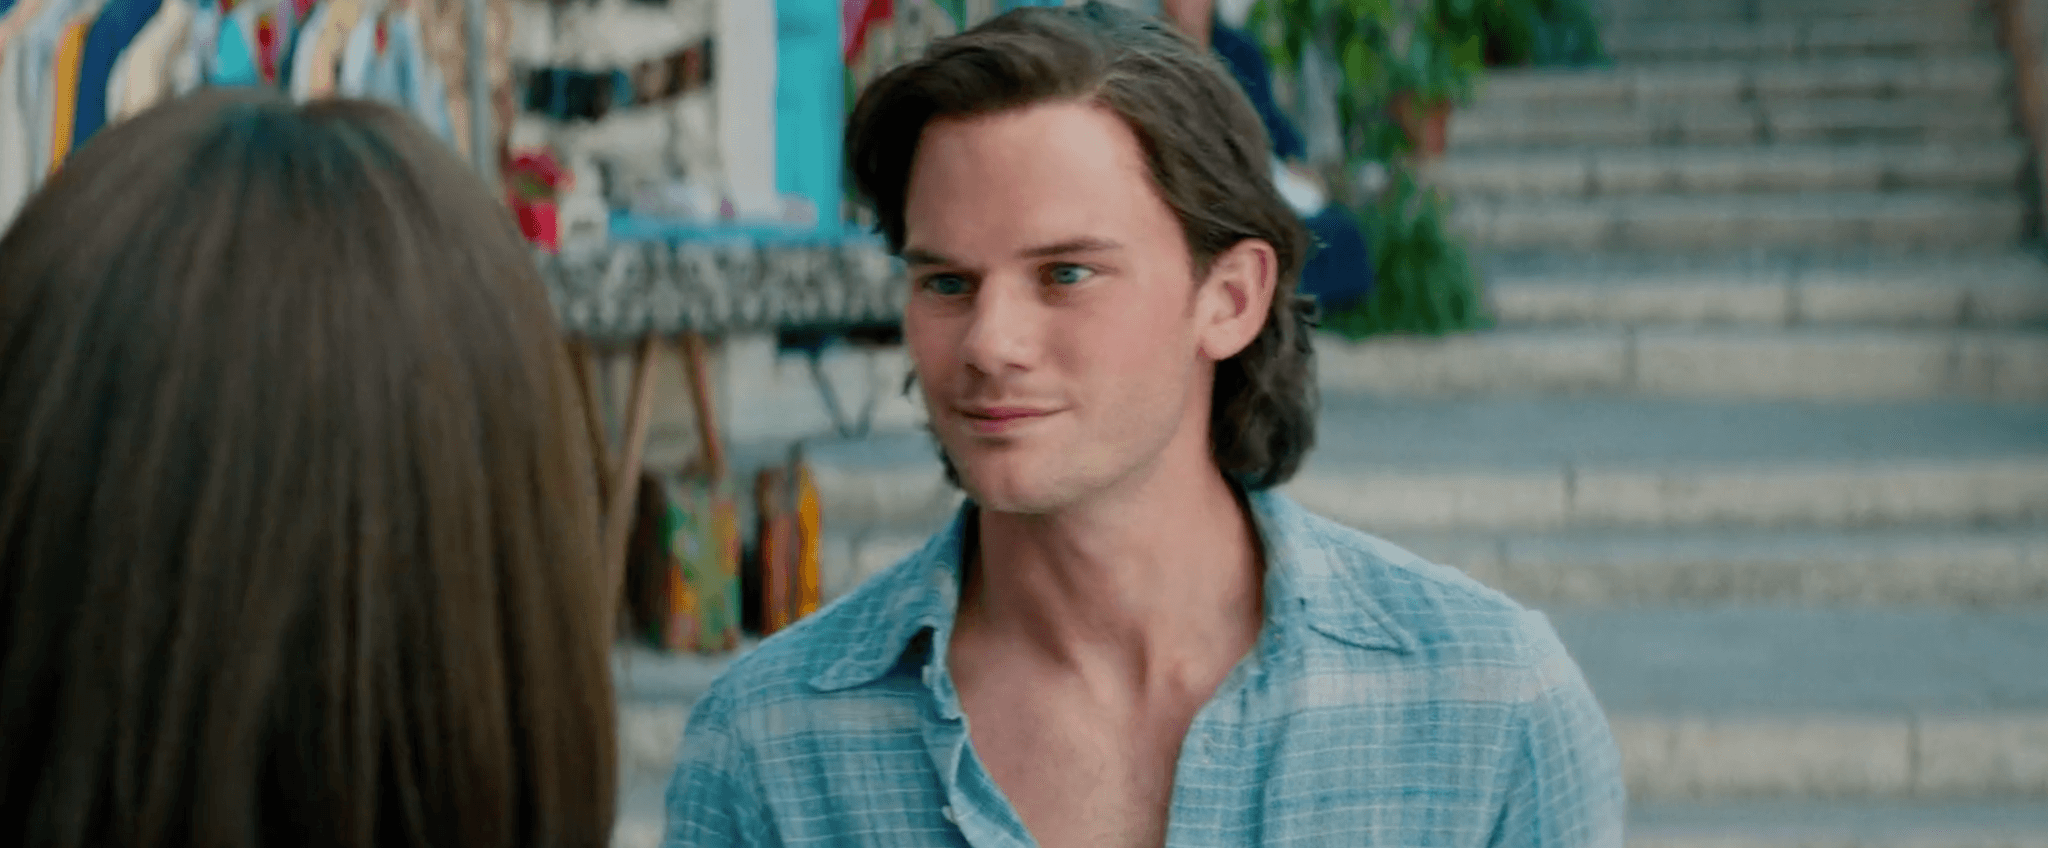 Image belongs to Universal Pictures. Young Sam in market used in Mamma Mia II